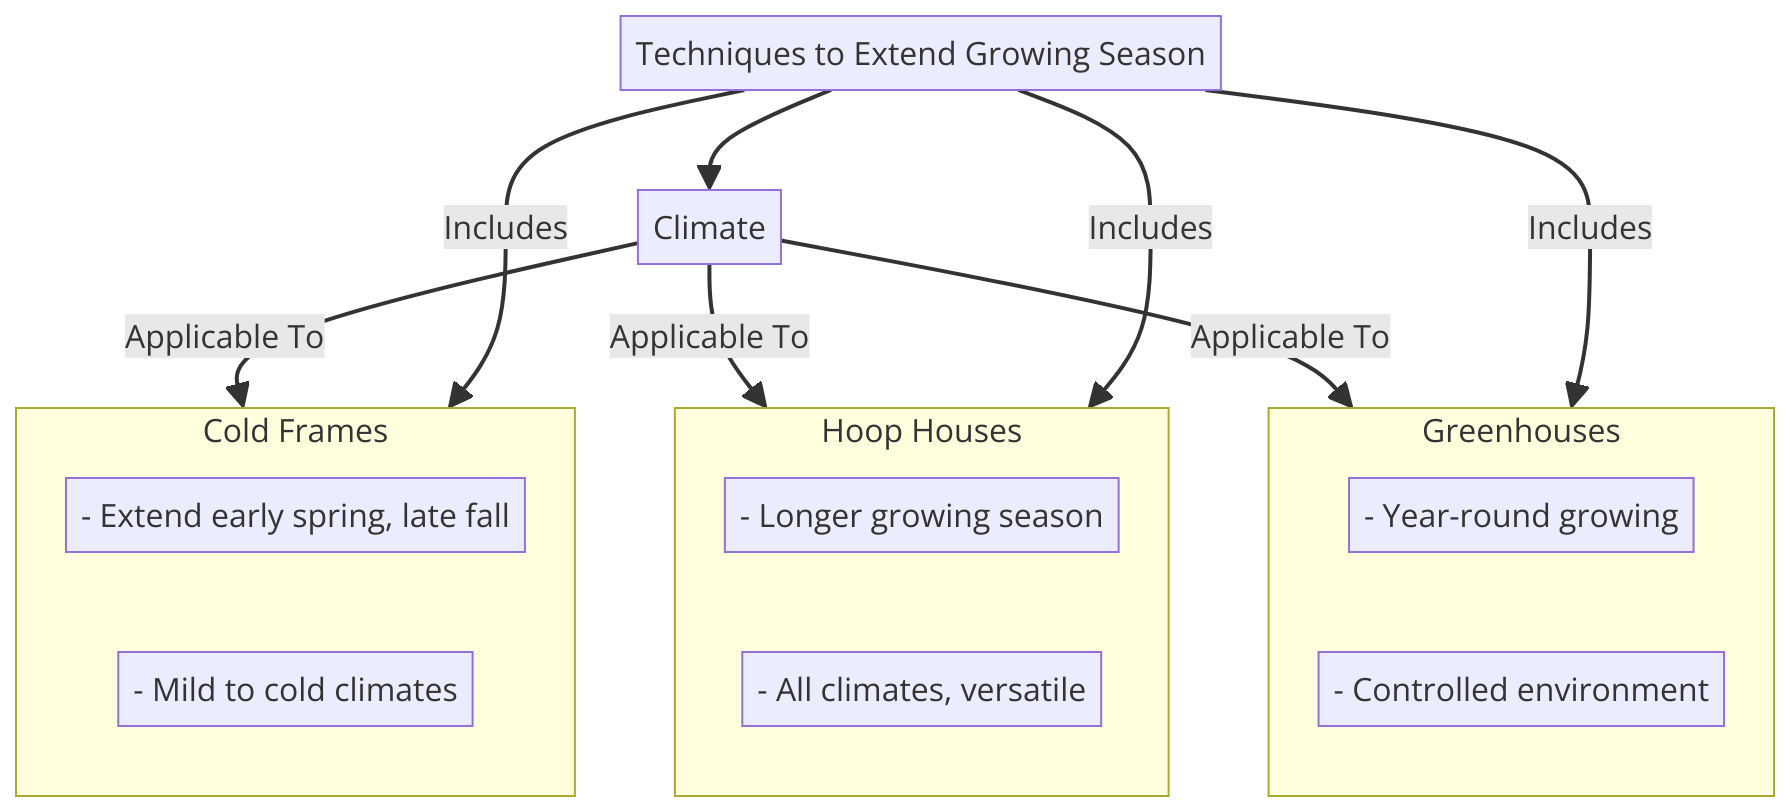 graph diagram illustrating techniques like cold frames, hoop houses, and greenhouses used to extend the growing season in various climates